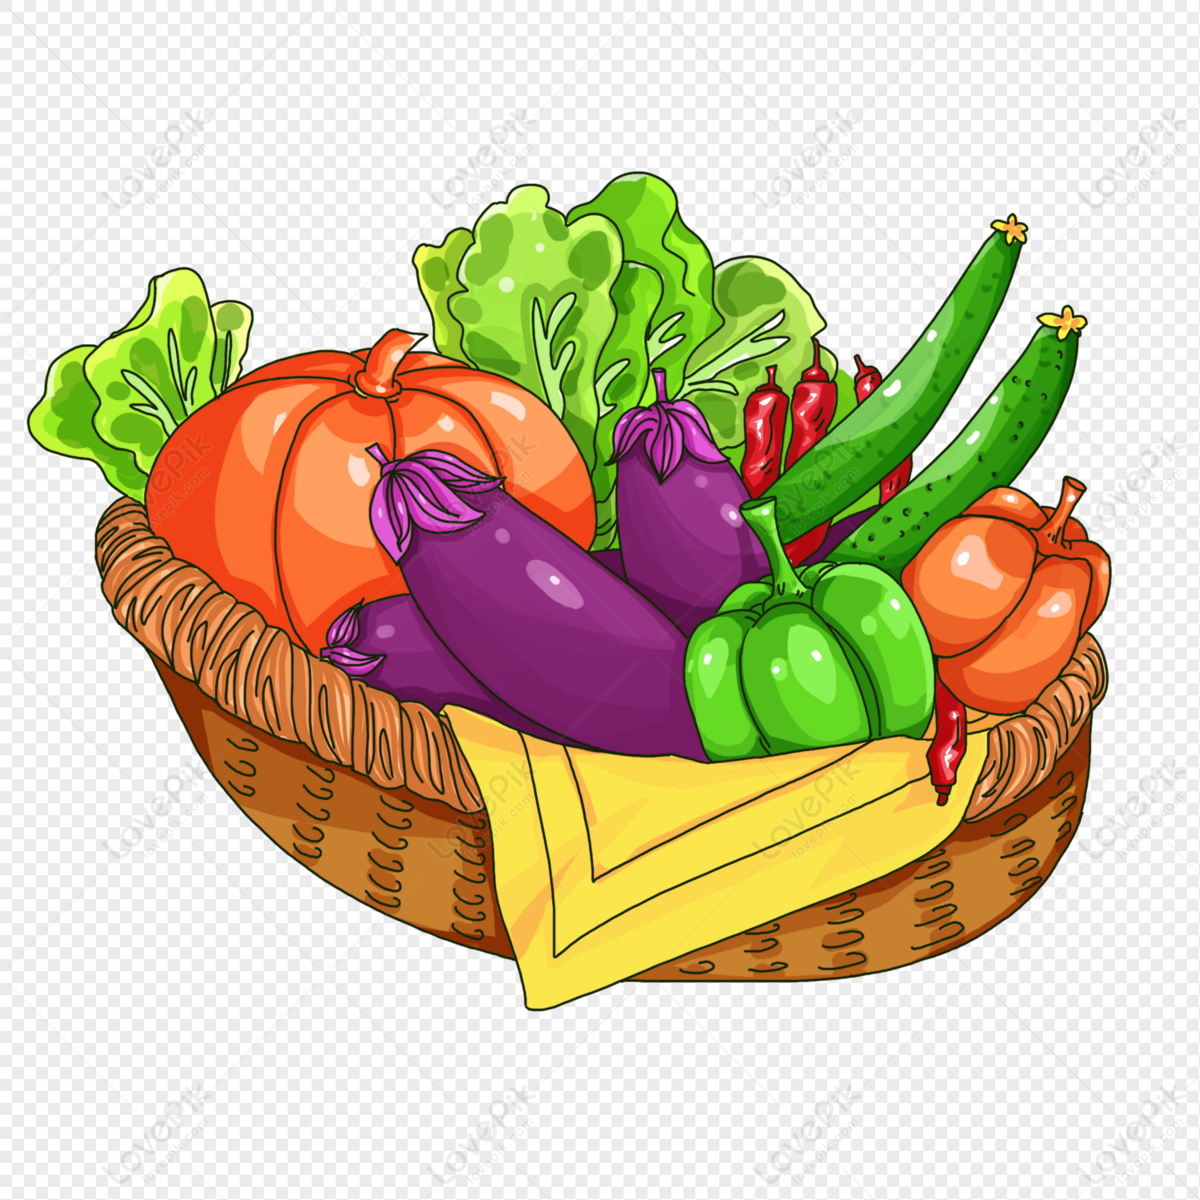 How to Draw Vegetable Basket (Vegetables) Step by Step |  DrawingTutorials101.com